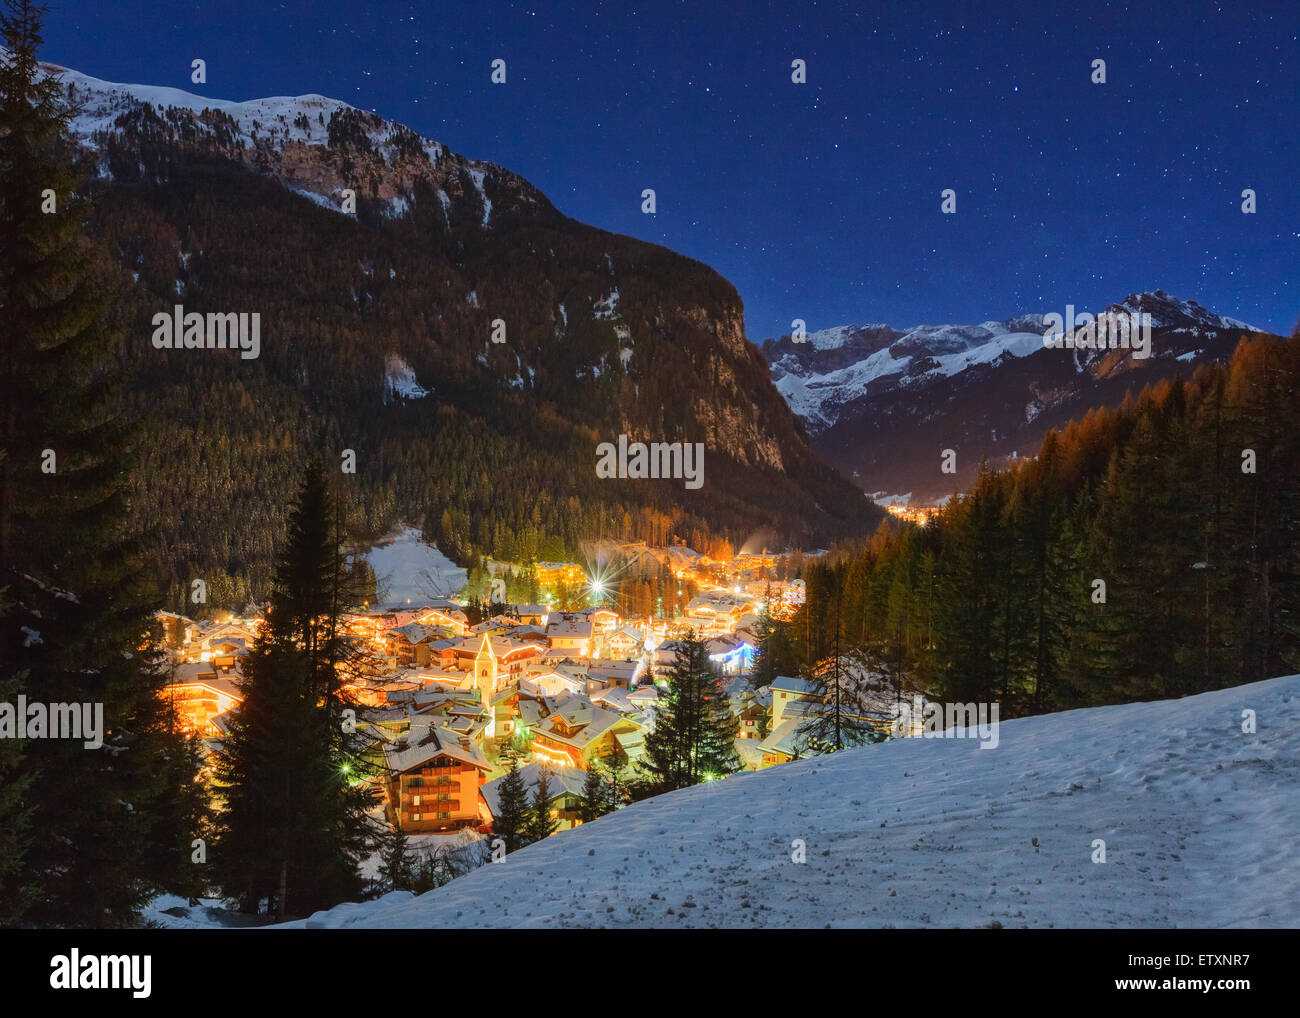 Winter landscape of village in the mountains Stock Photo